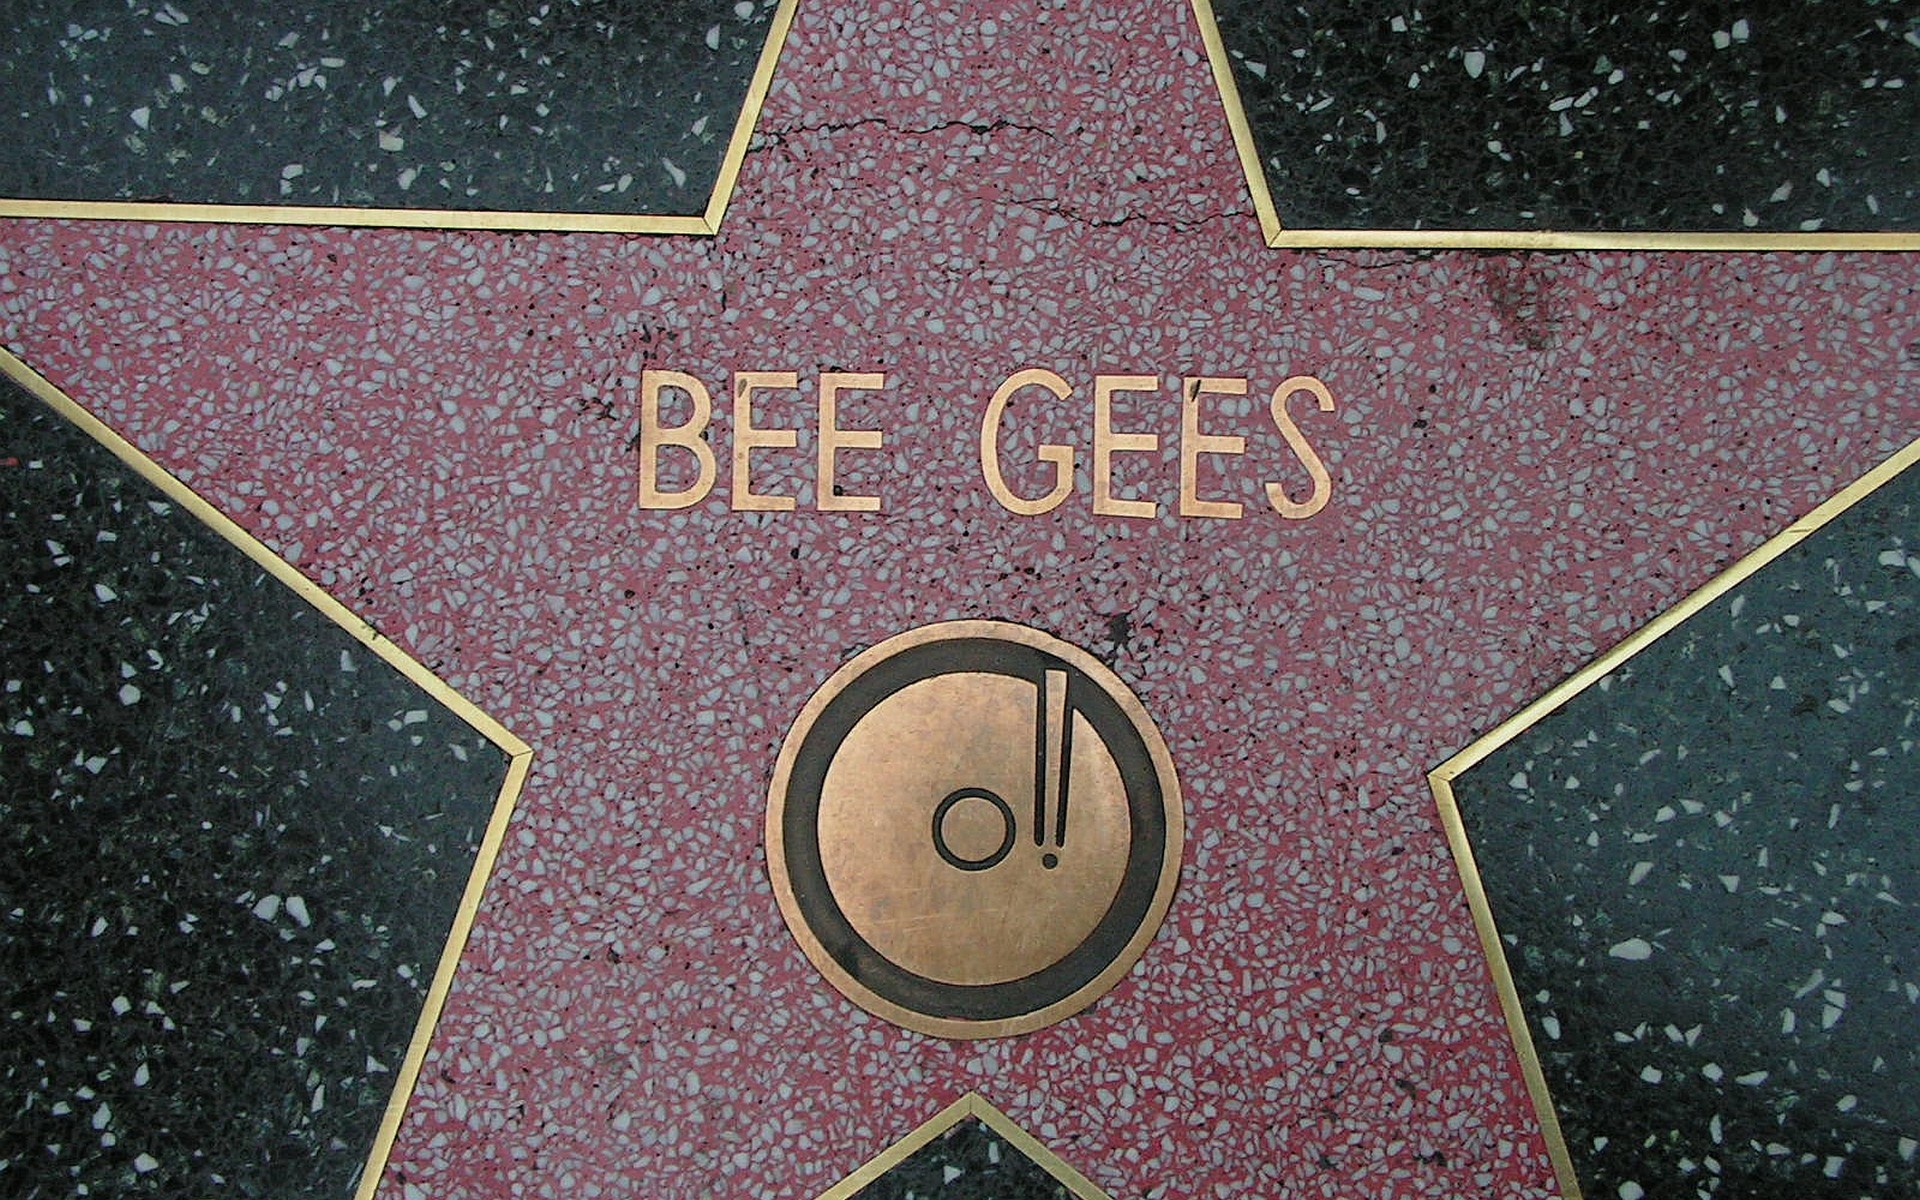 HD wallpaper, 1920X1200 Hd Desktop, Blackpool Grand Theatre, Desktop Hd Bee Gees Background Image, Bee Gees, Timeless Classics, Greatest Hits